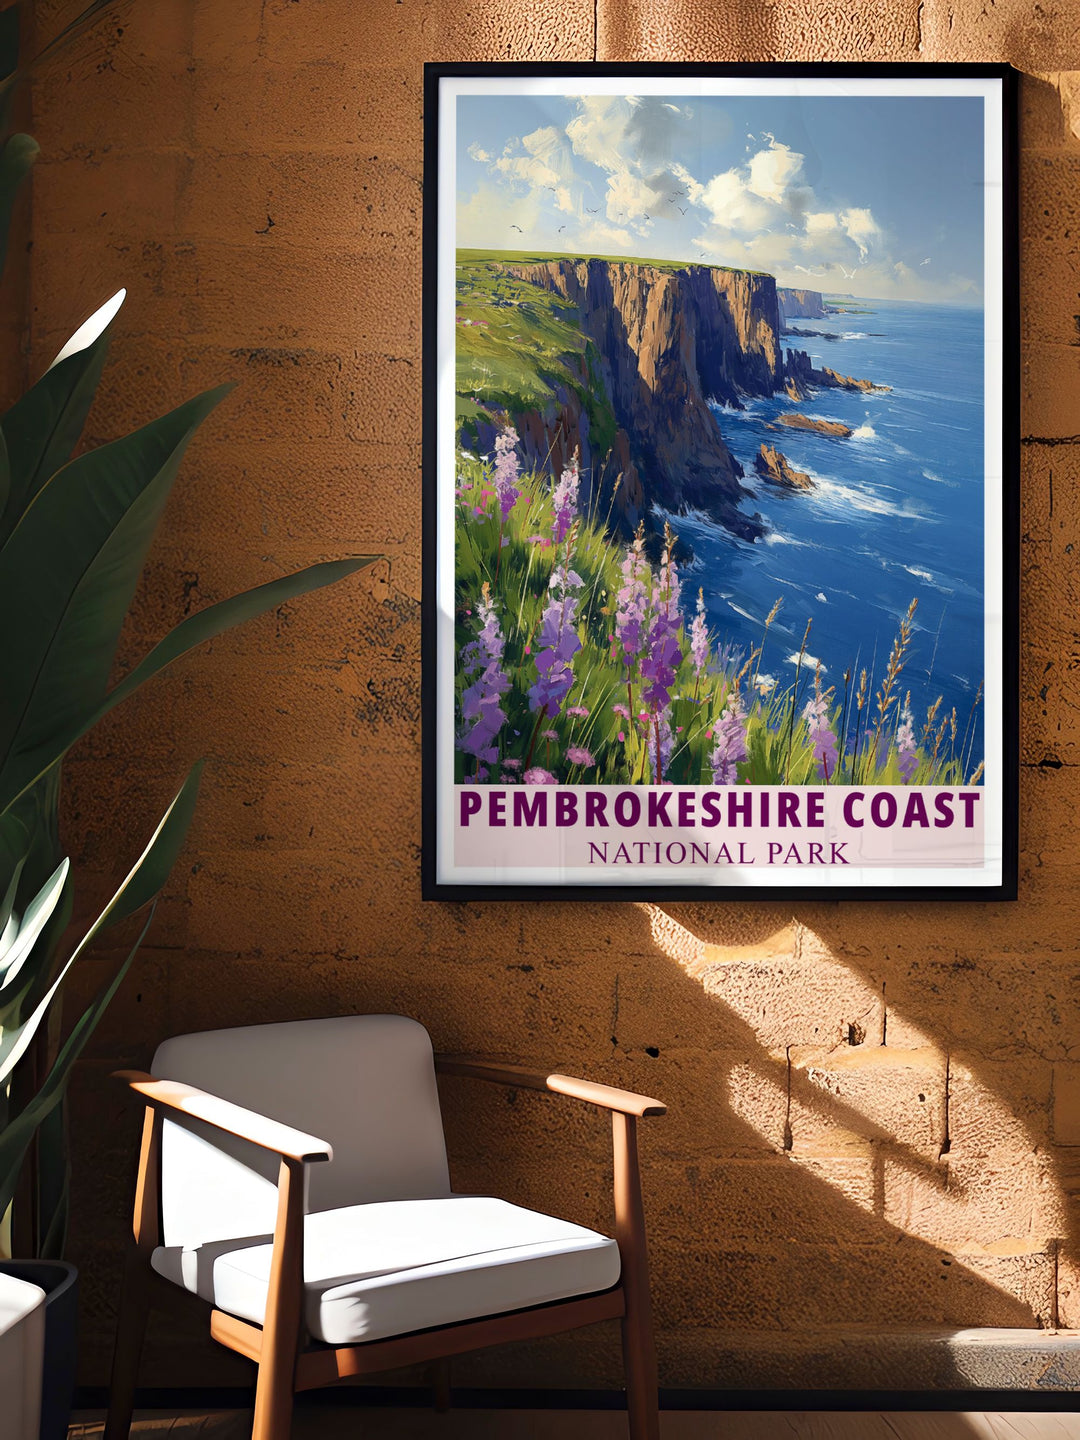 Art Deco print of coastal cliffs in Pembrokeshire Wales showcasing the breathtaking beauty of the Welsh coastline perfect for collectors of vintage travel posters and lovers of UK national parks providing a timeless and elegant wall art piece.